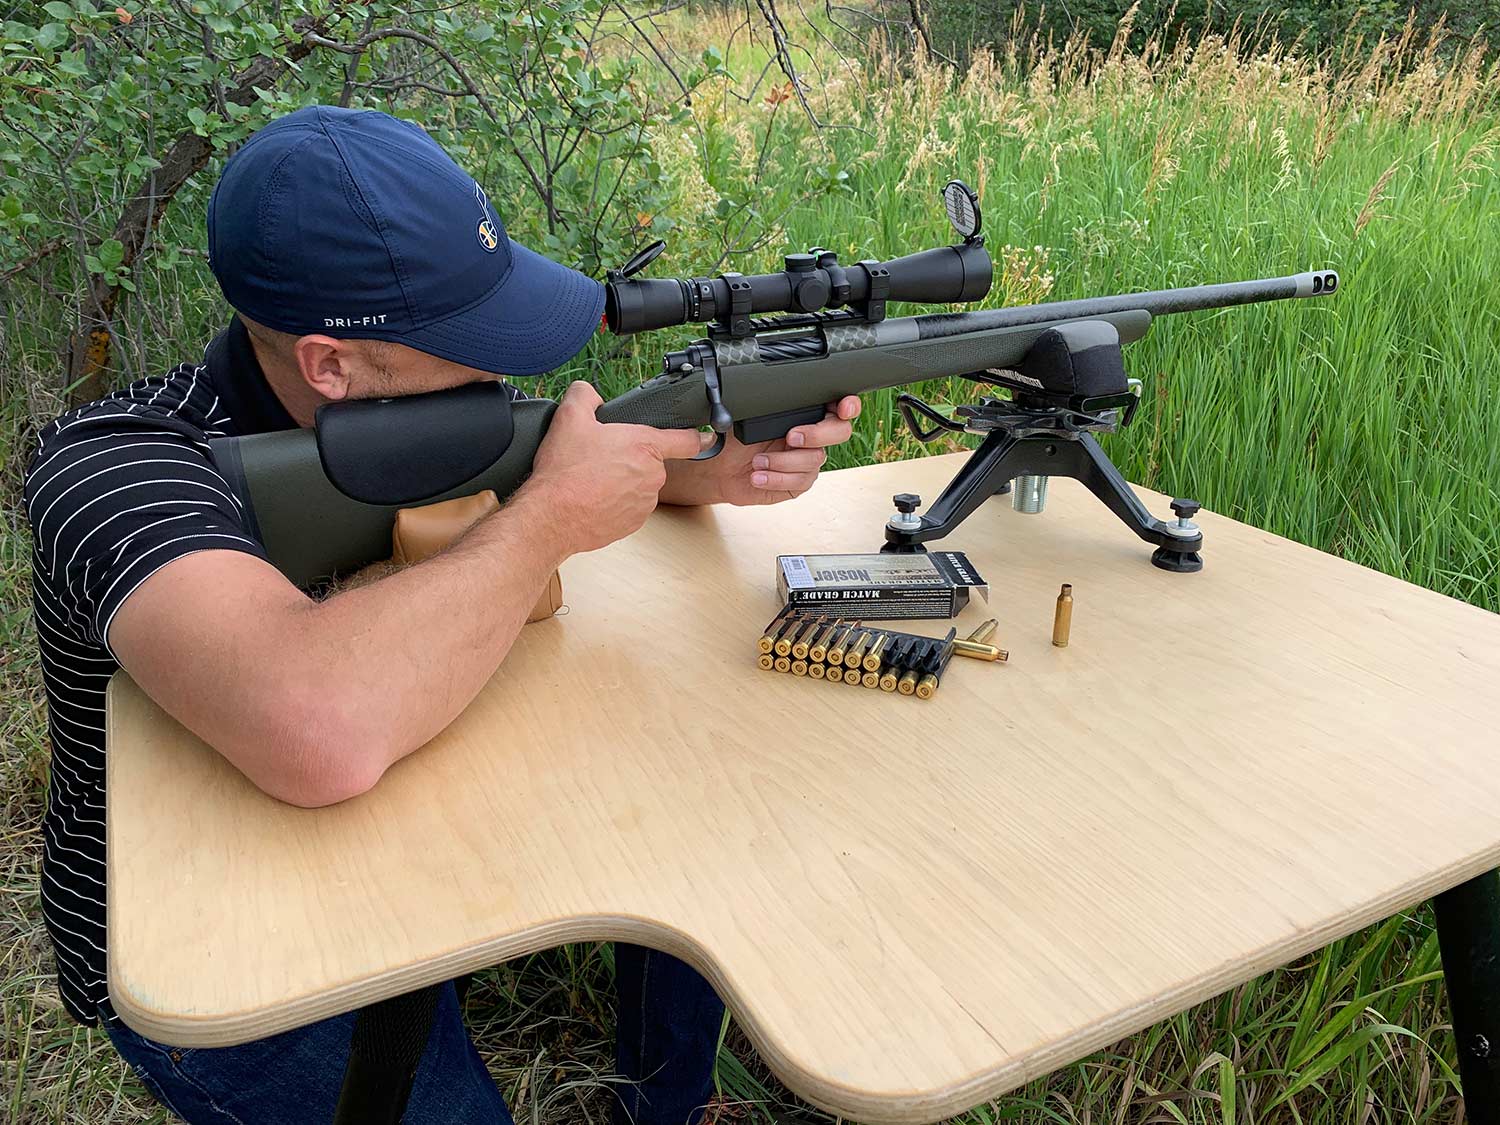 A man aiming a rifle propped on a table and shooting bipod.